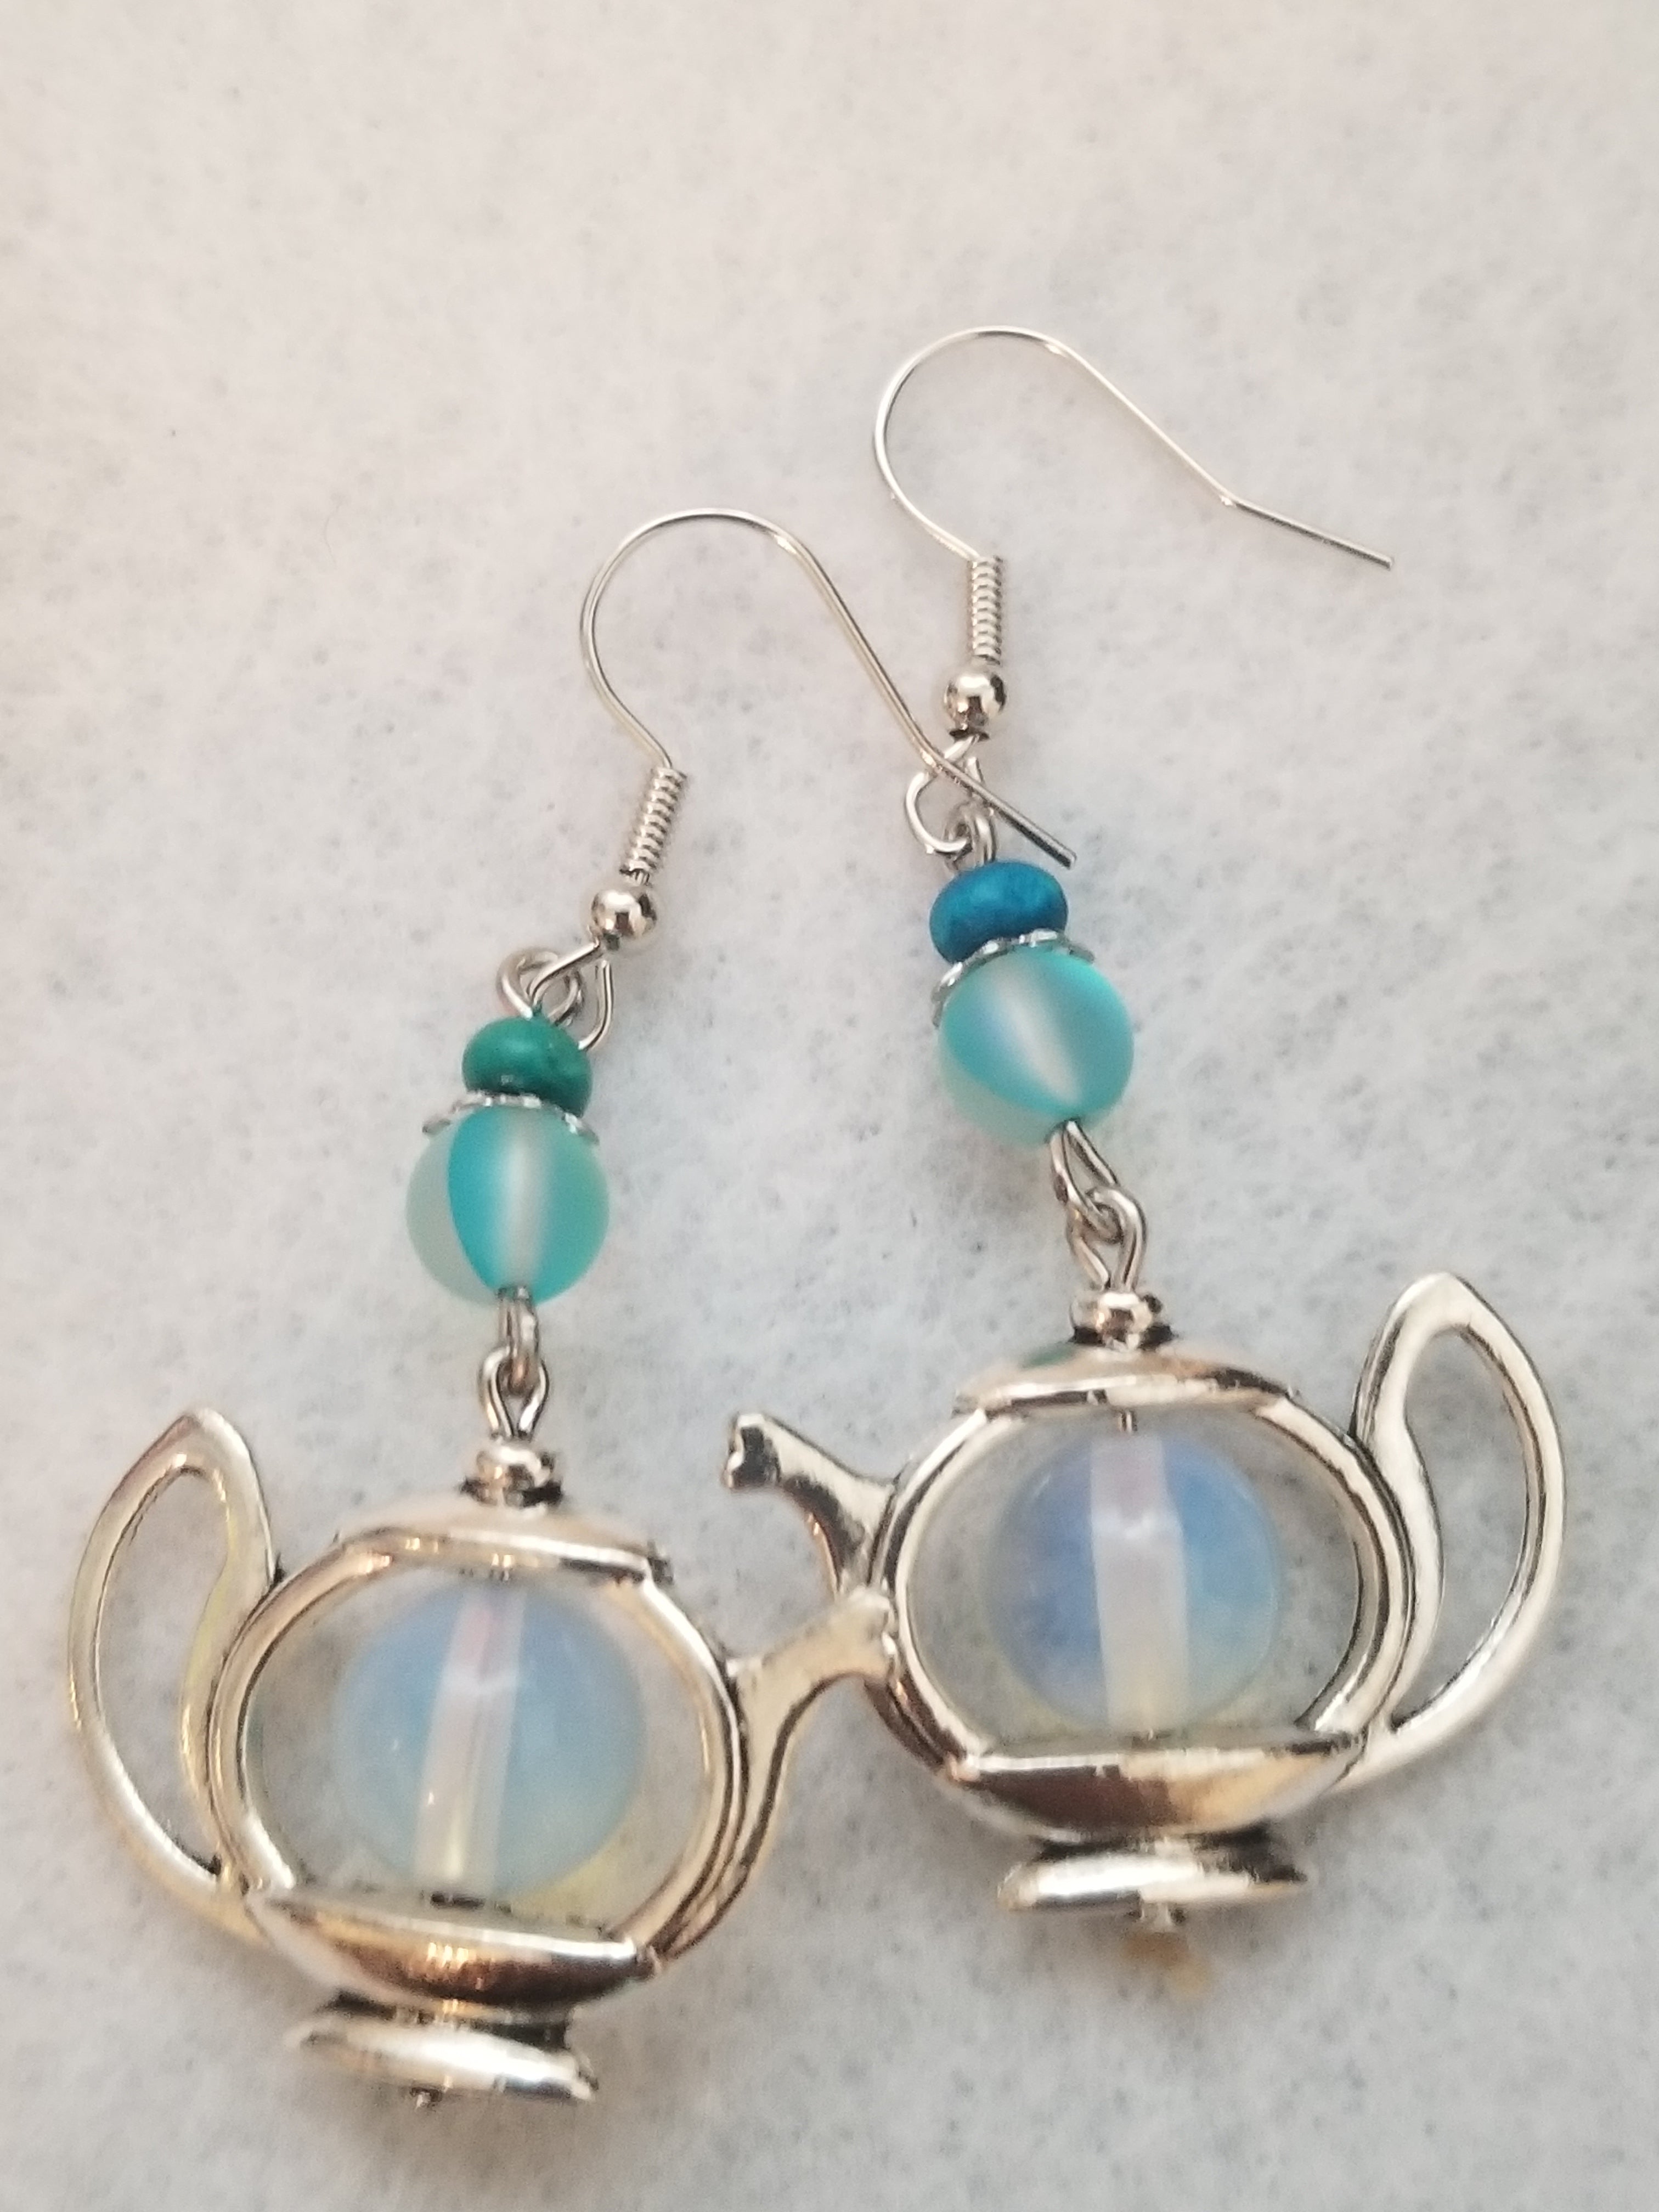 Turquois Colored #51 Earrings